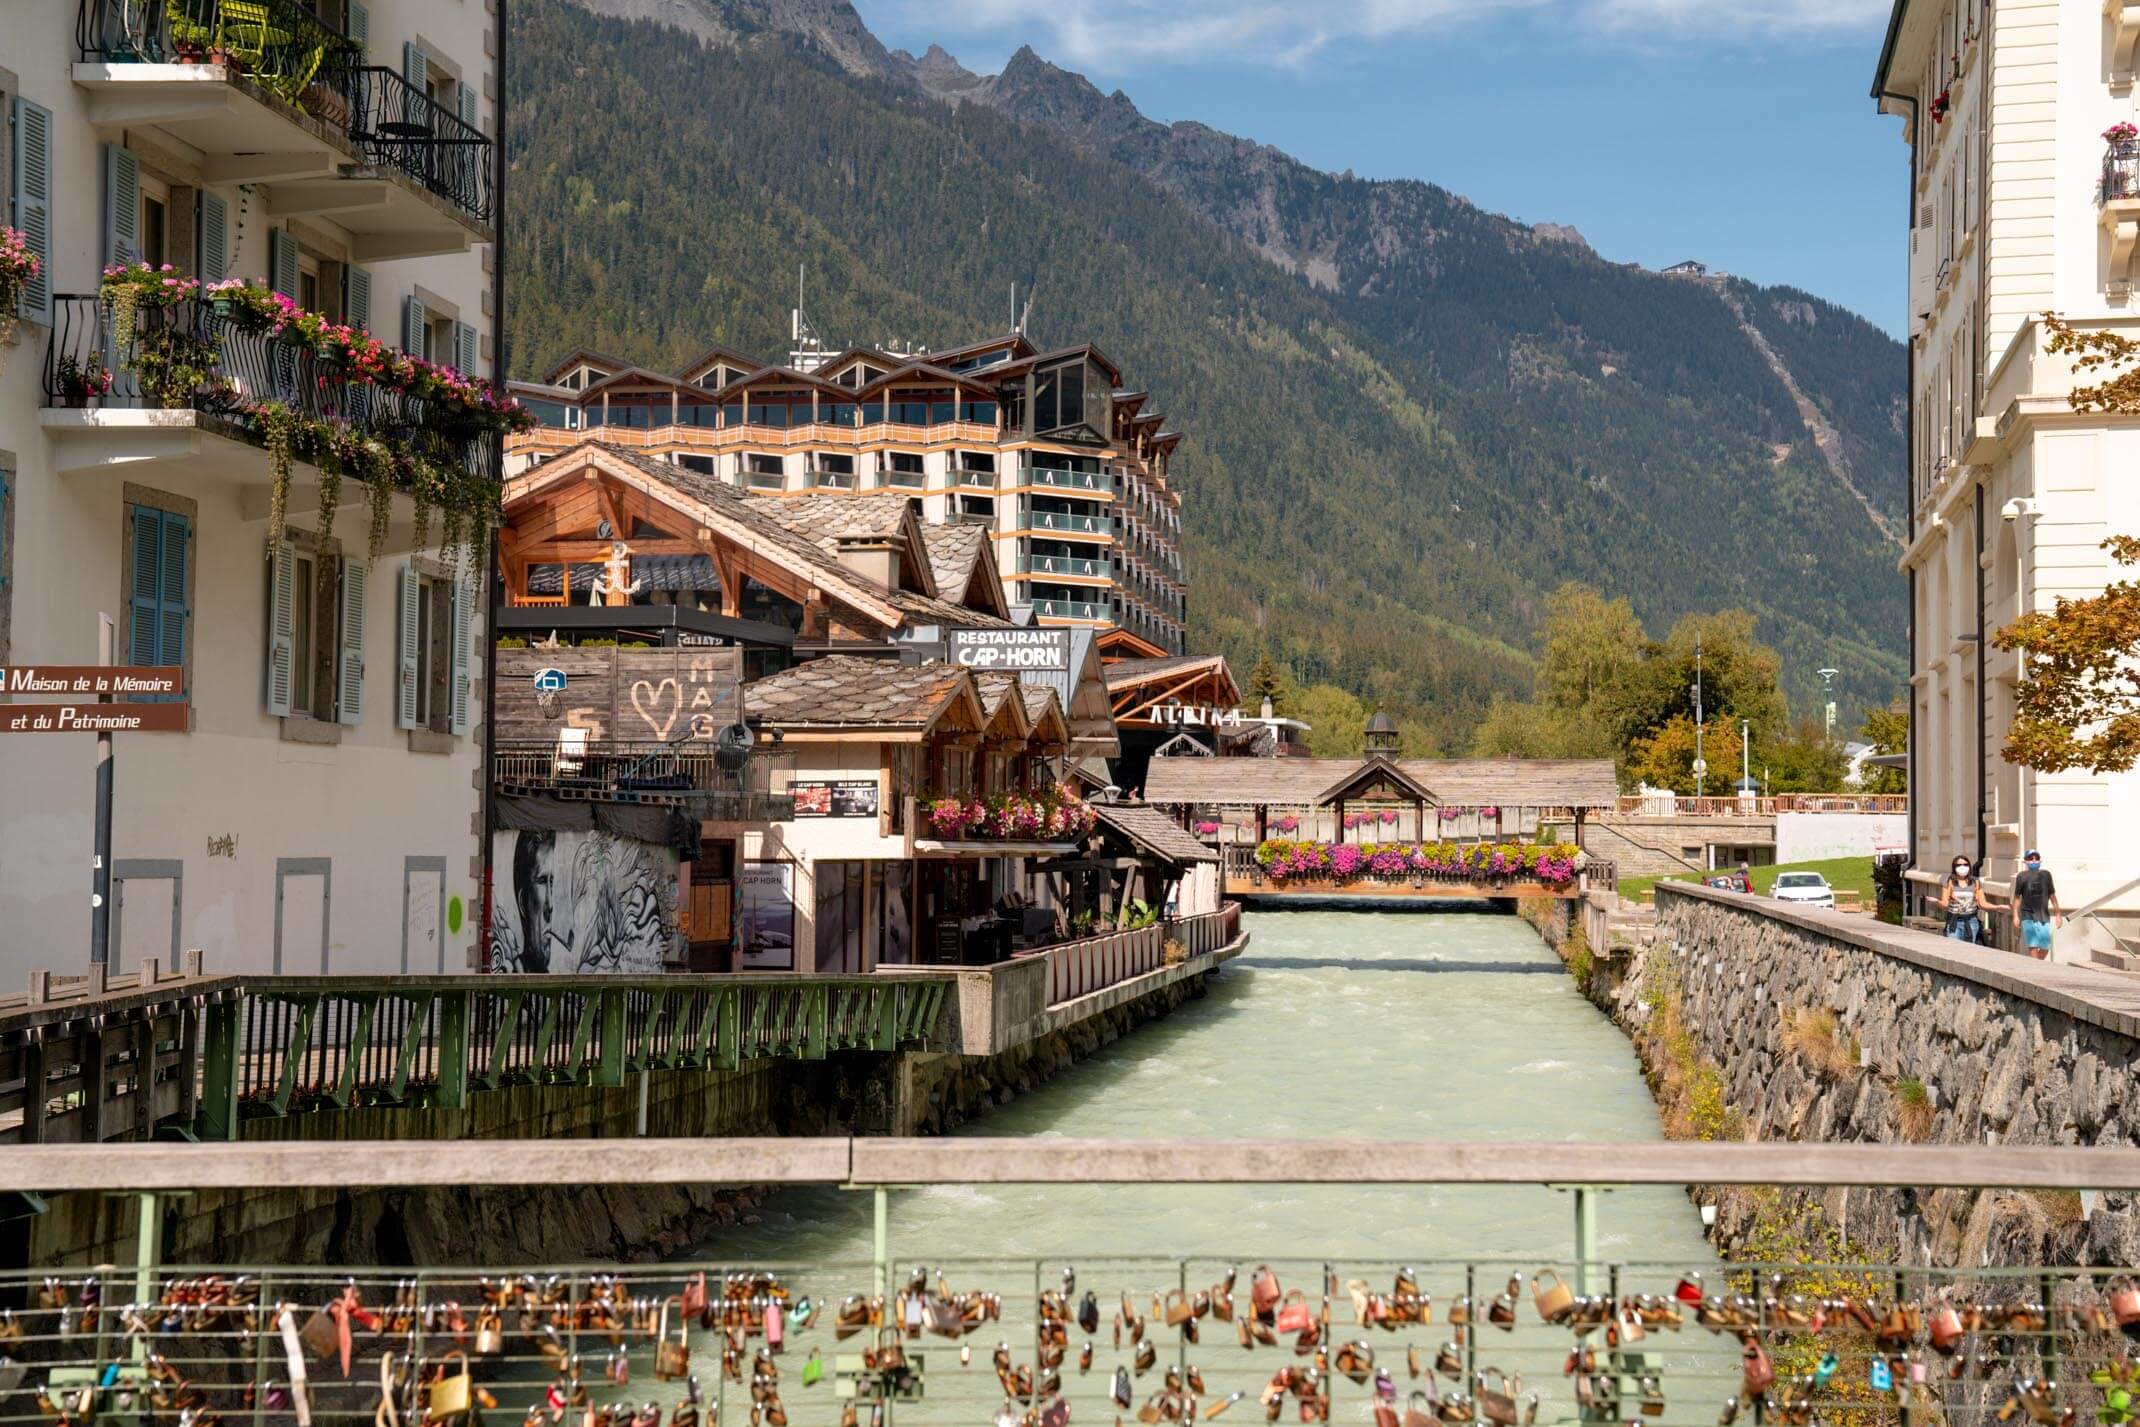 A summer guide to Chamonix, France